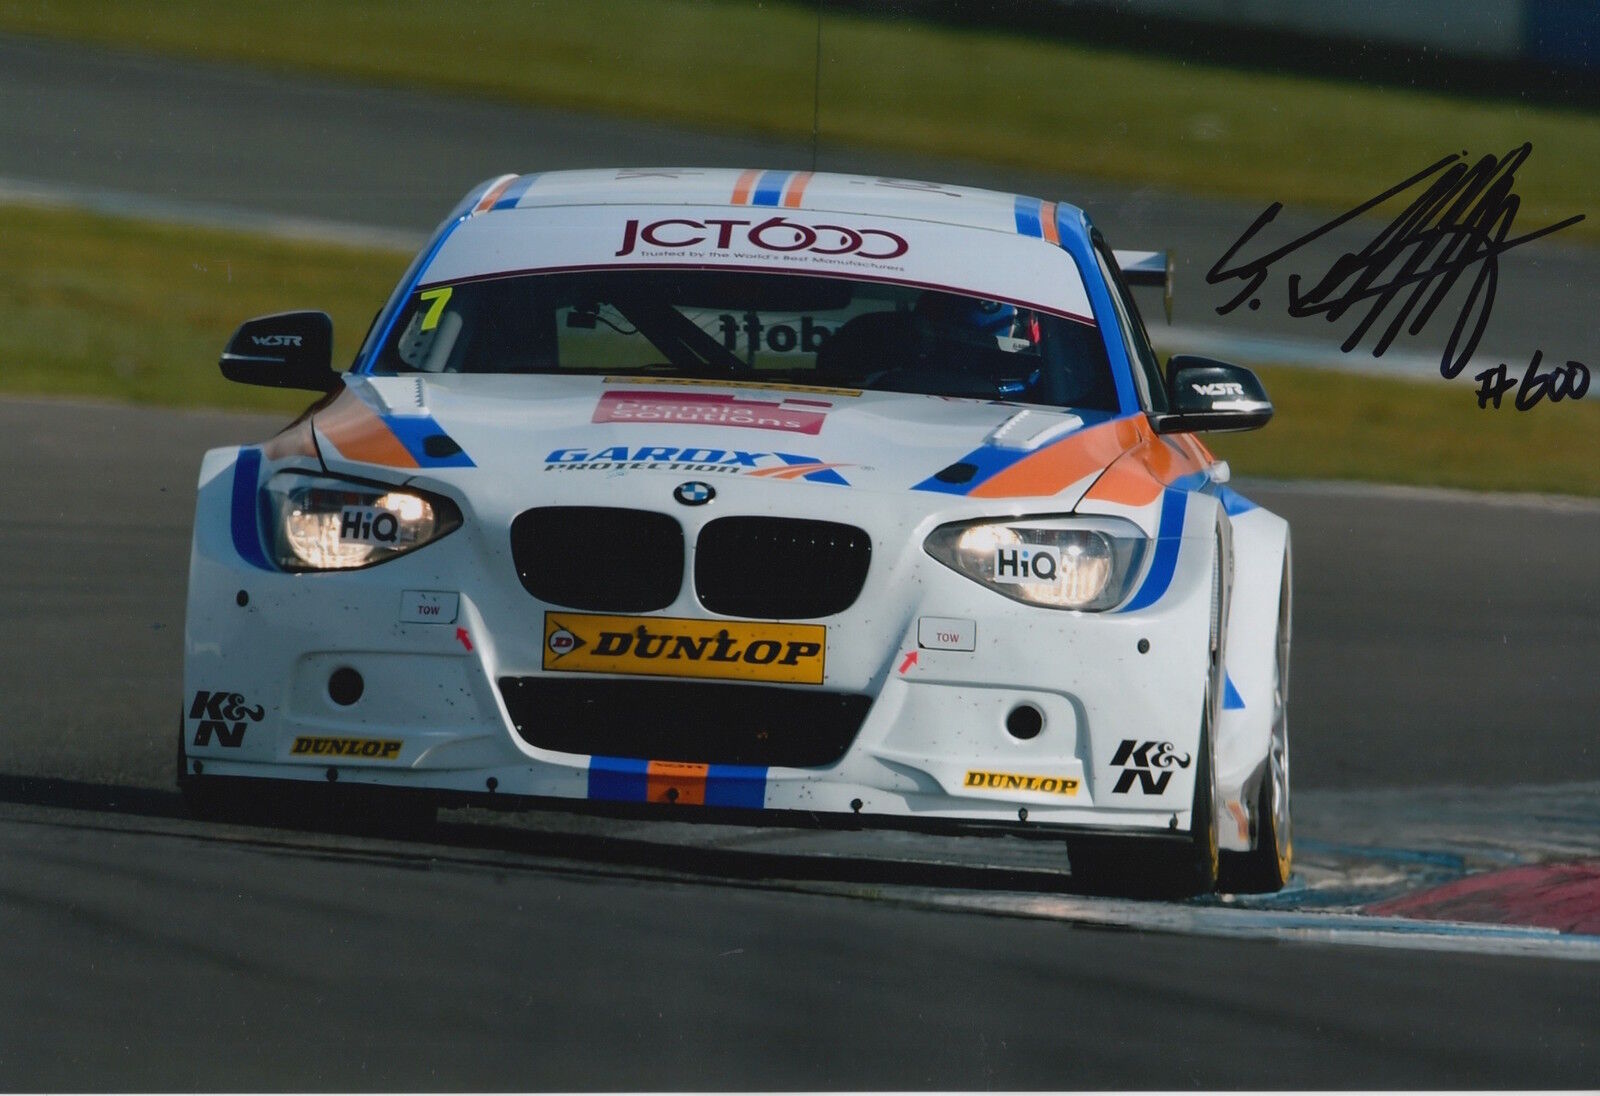 Sam Tordoff Hand Signed 12x8 Photo Poster painting BMW Touring Cars.